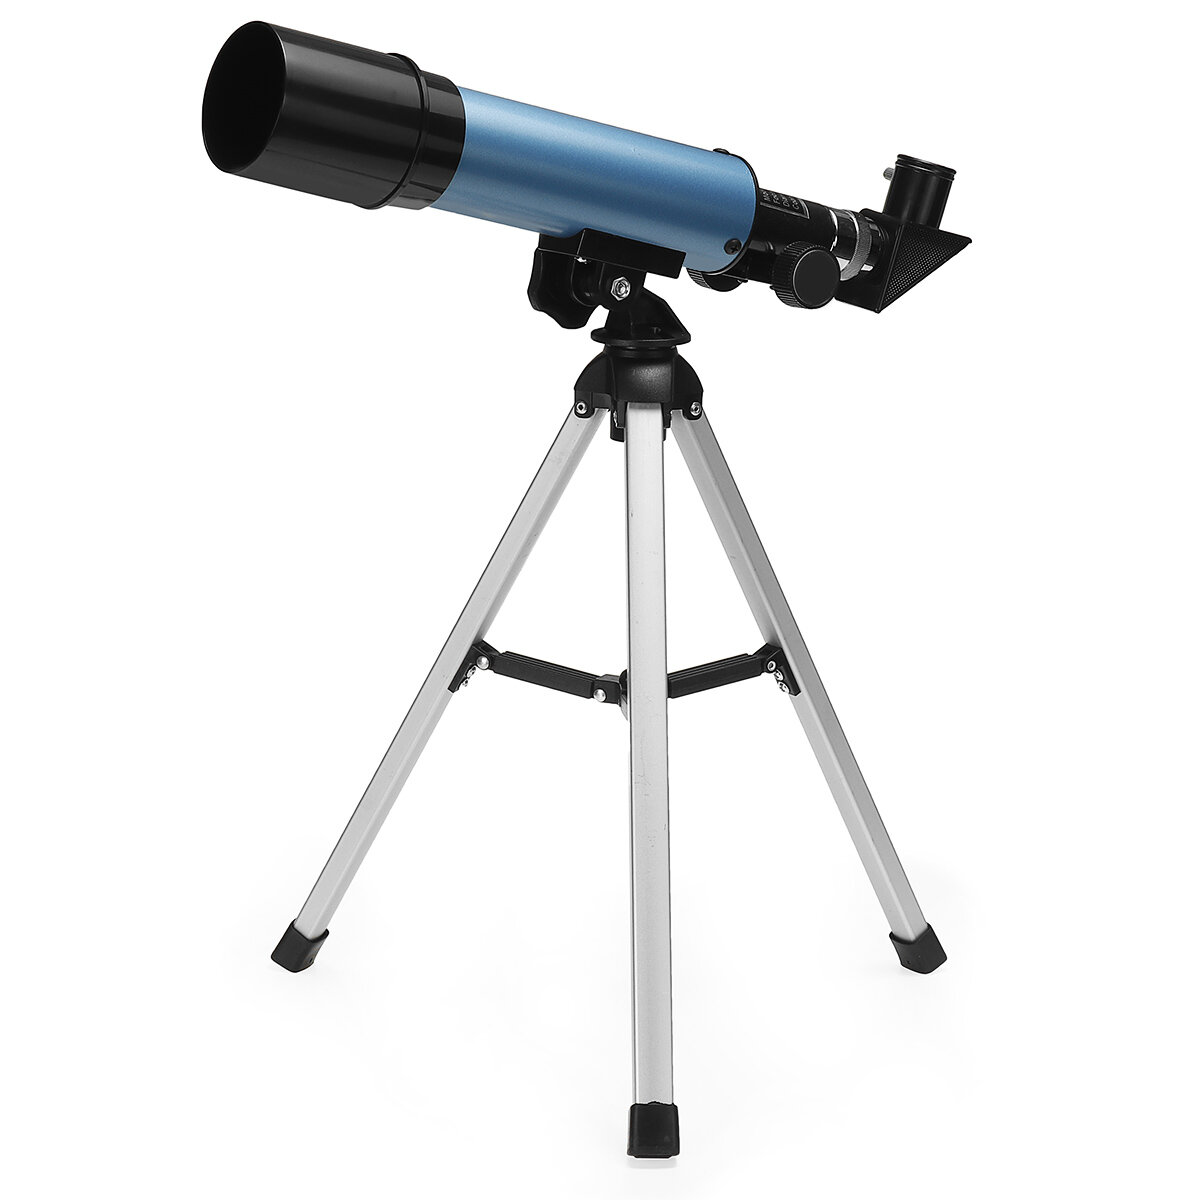 90x Magnification Astronomical Telescope Clear Image with Remote Control and Camera Rod for Observe 